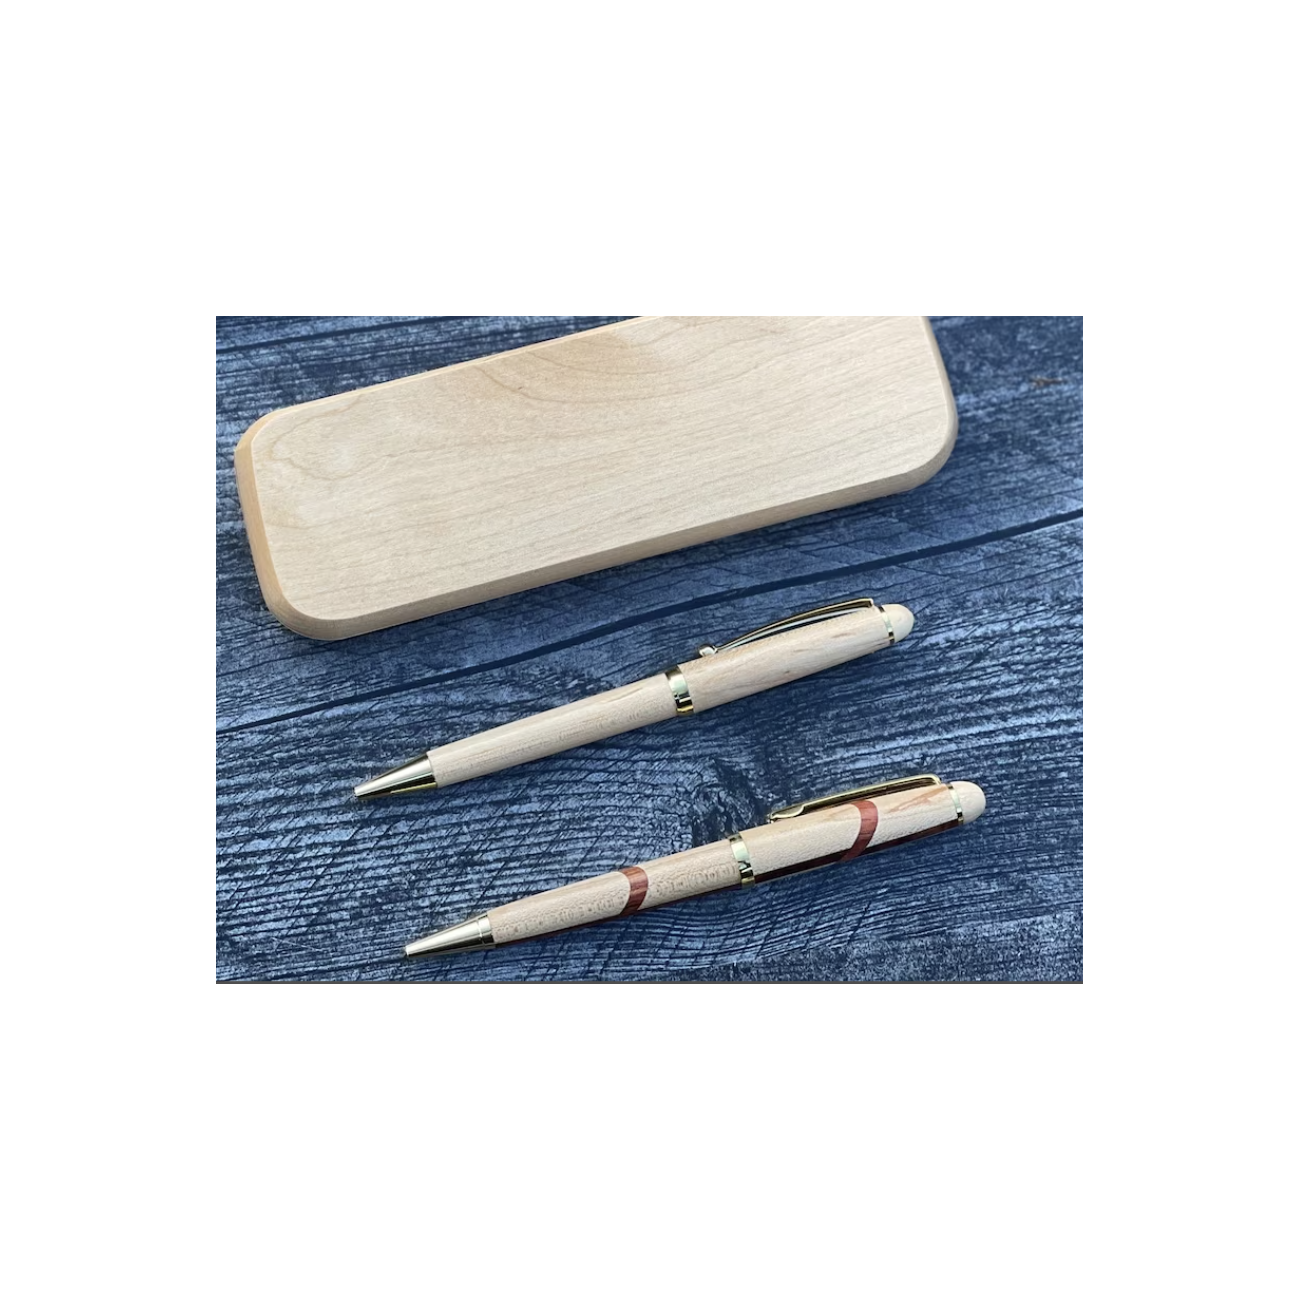 Maple Wooden Pen Case and Pen Set - Includes One Location Laser Engraving